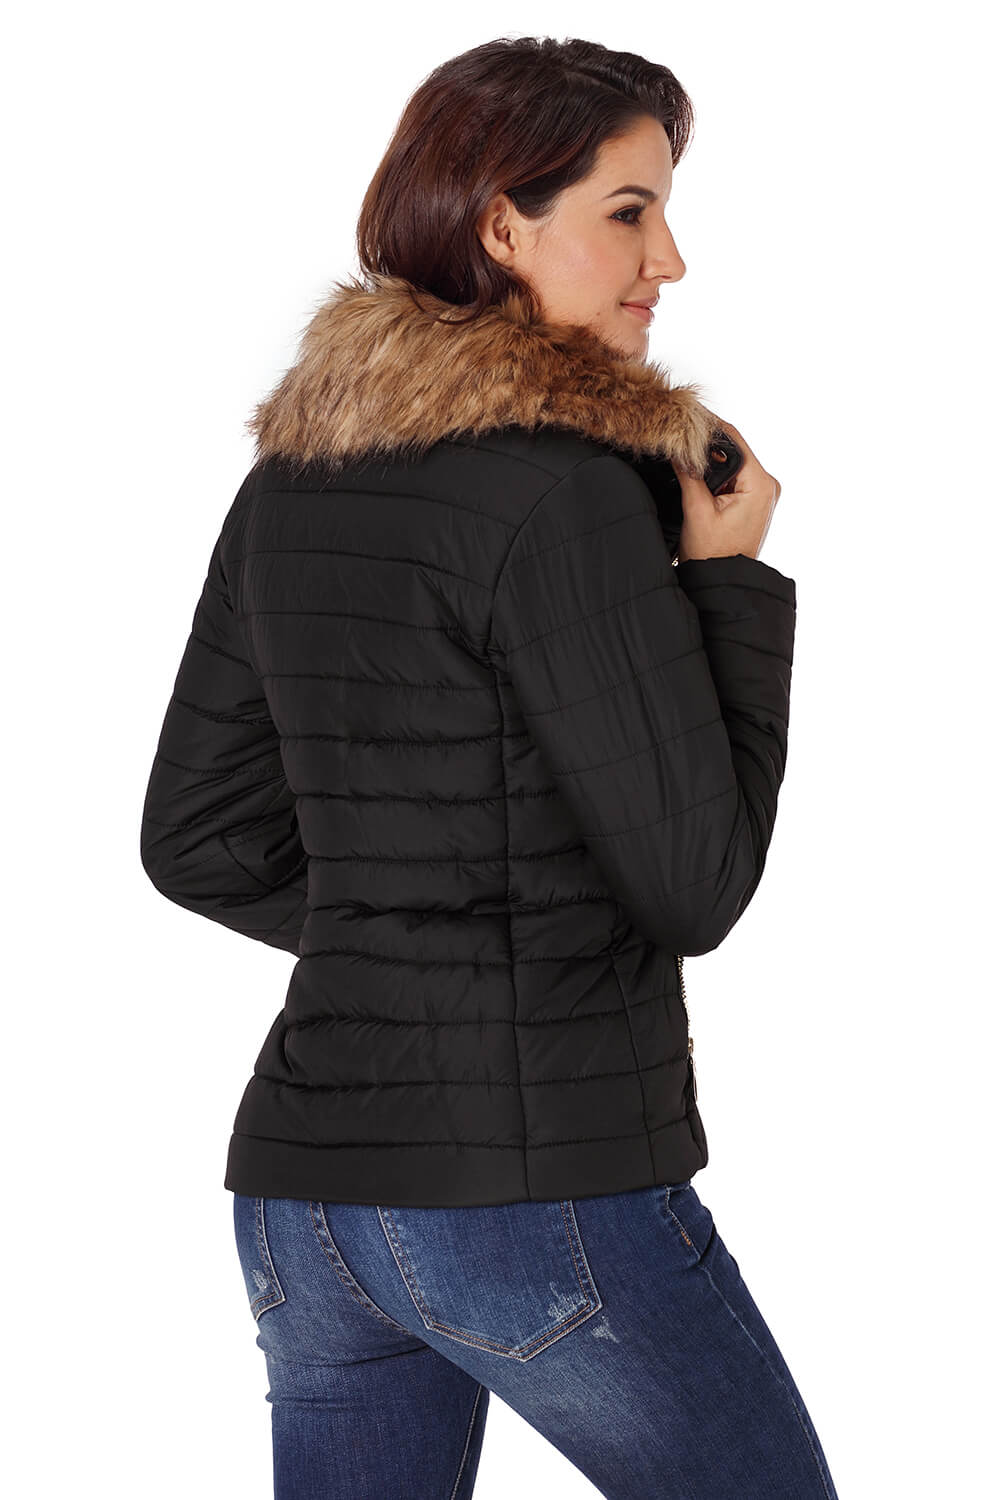 LC85117-2XXL, LC85117-2XL, LC85117-2L, LC85117-2M, LC85117-2S, Winter Coats for Women Camel Faux Fur Collar Trim Black Quilted Jacket Outerwear